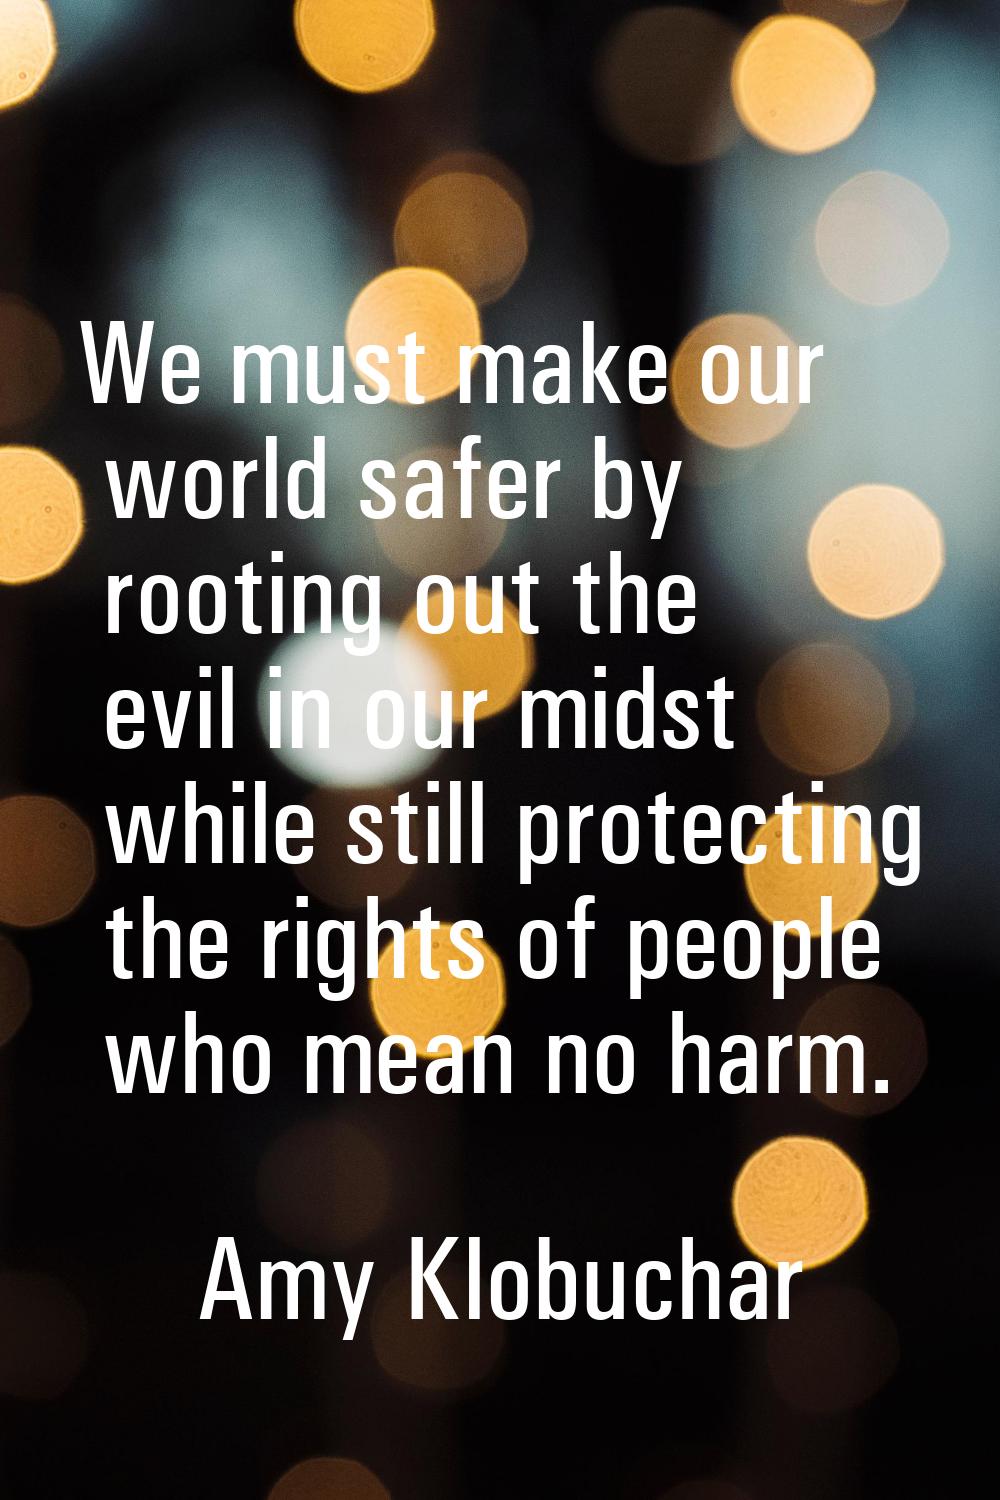 We must make our world safer by rooting out the evil in our midst while still protecting the rights